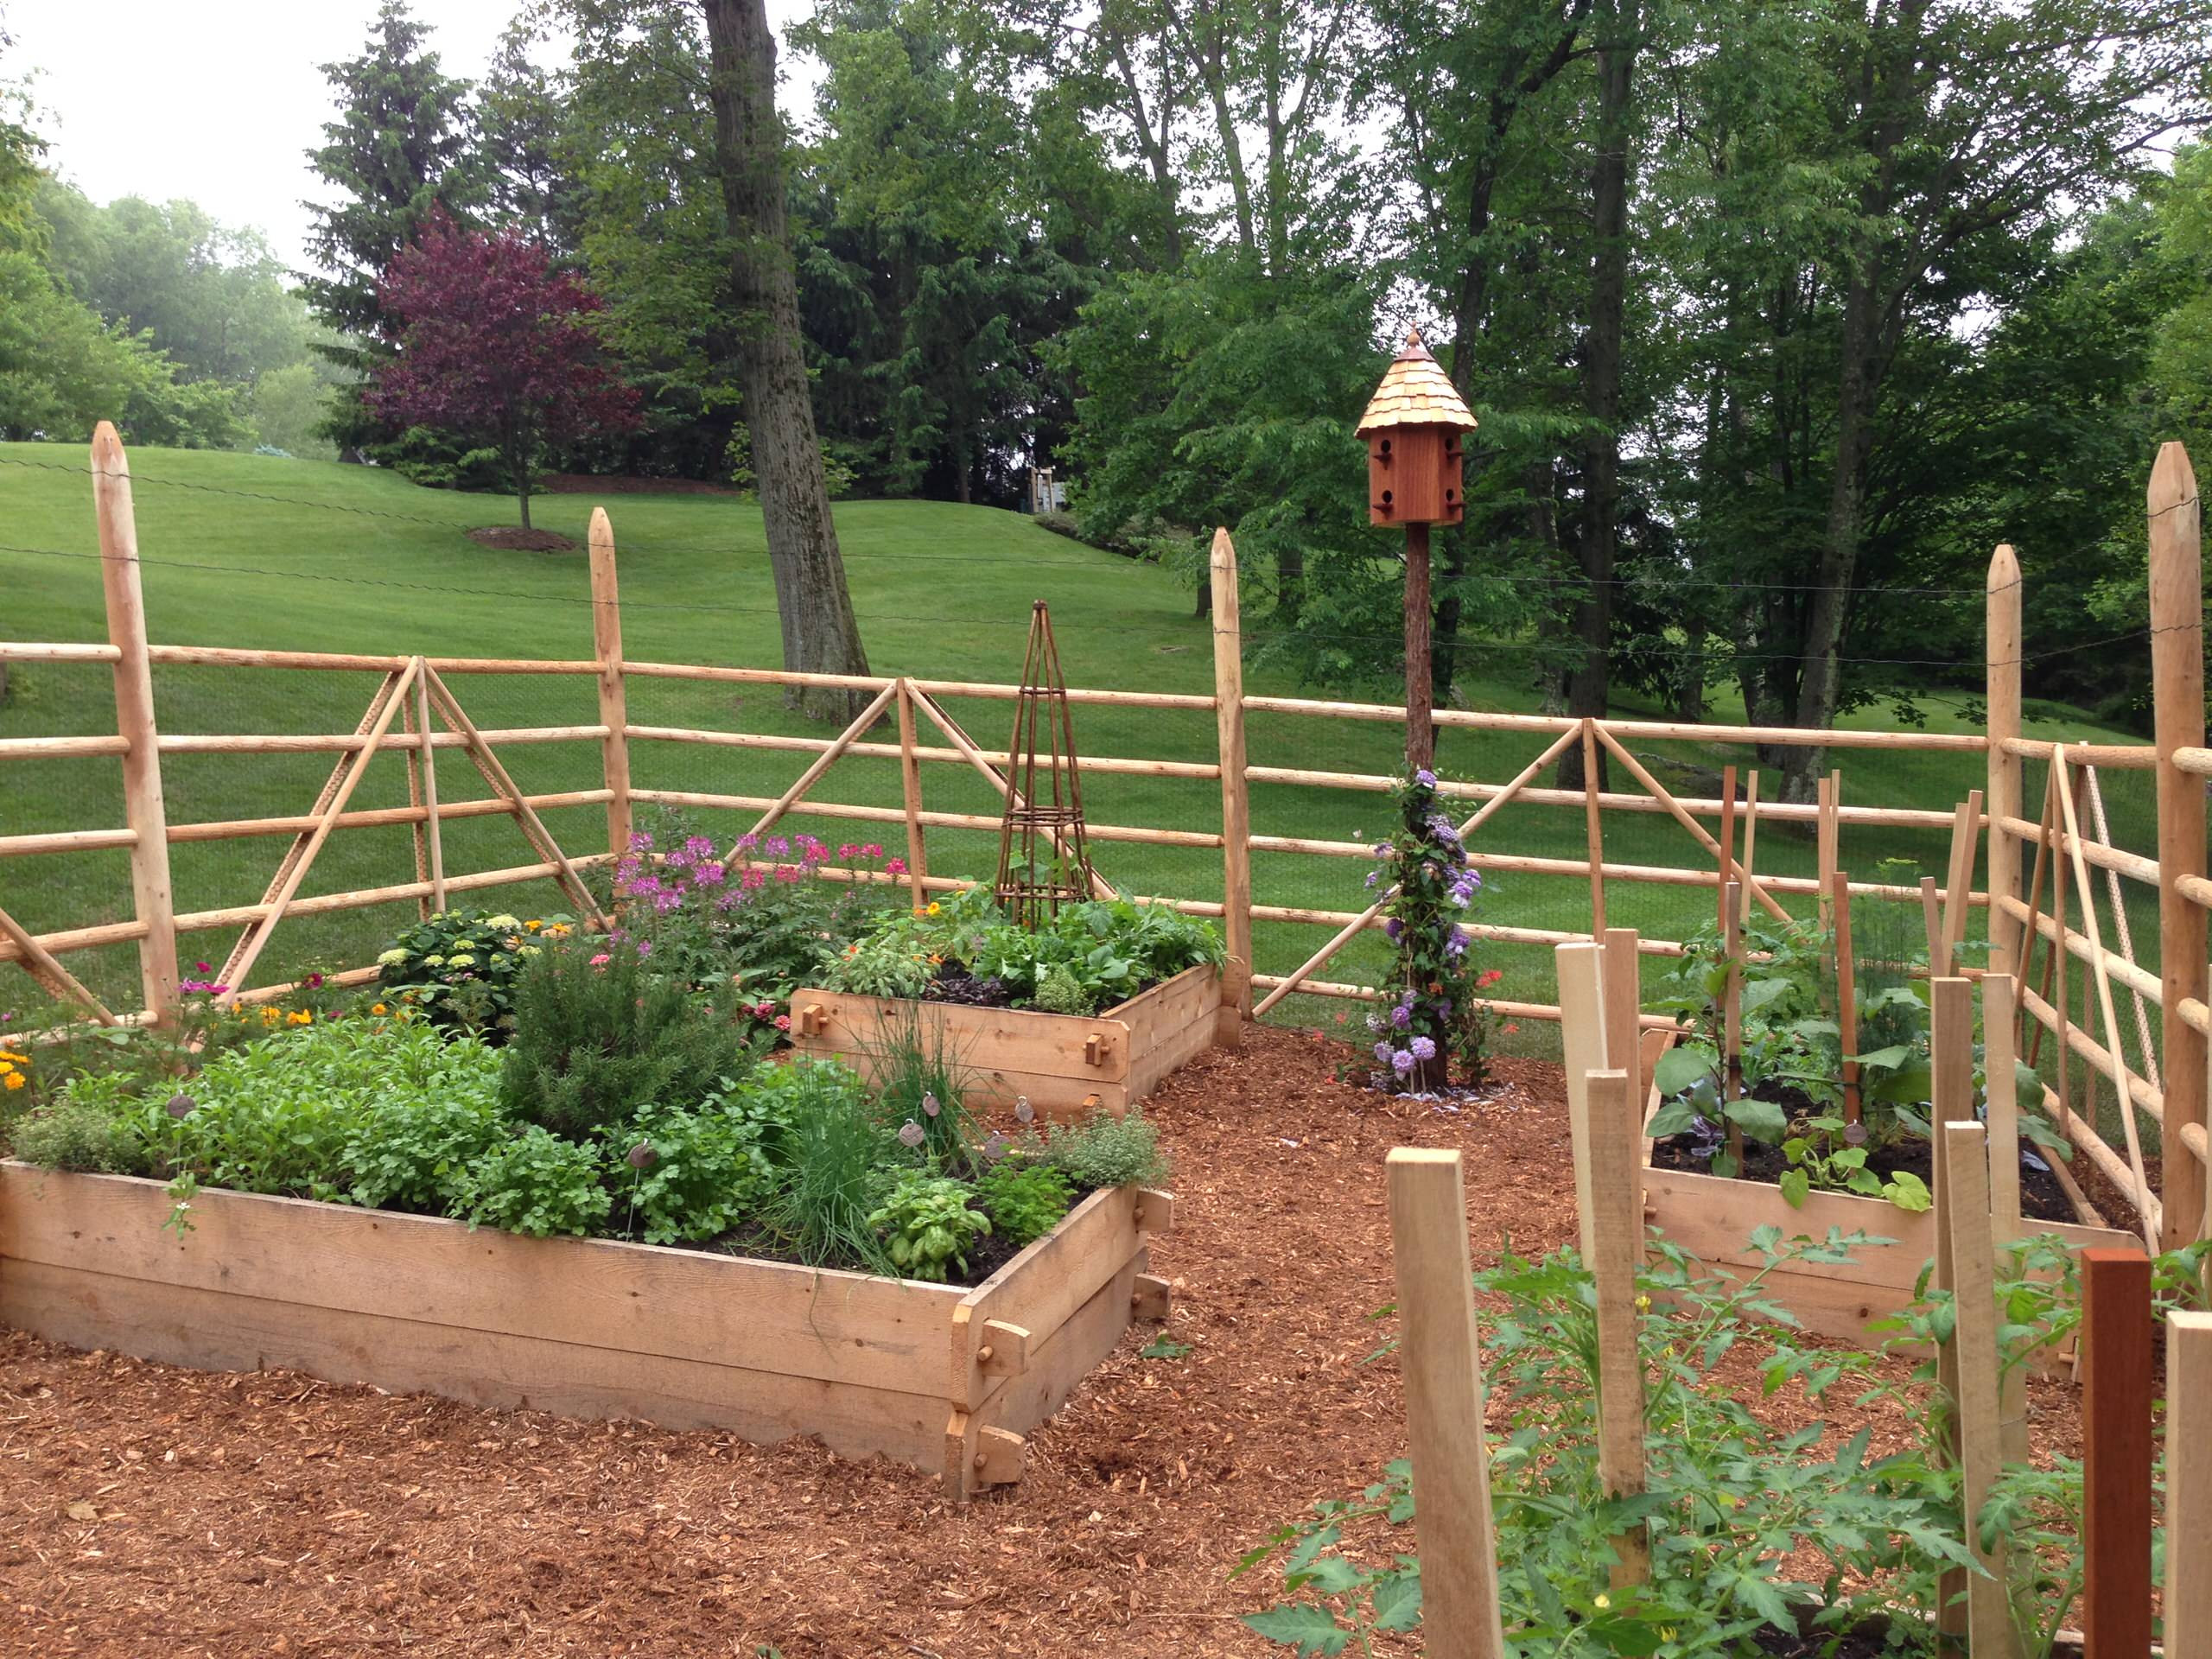 The new Vegetable Garden by Peter Atkins and Associates